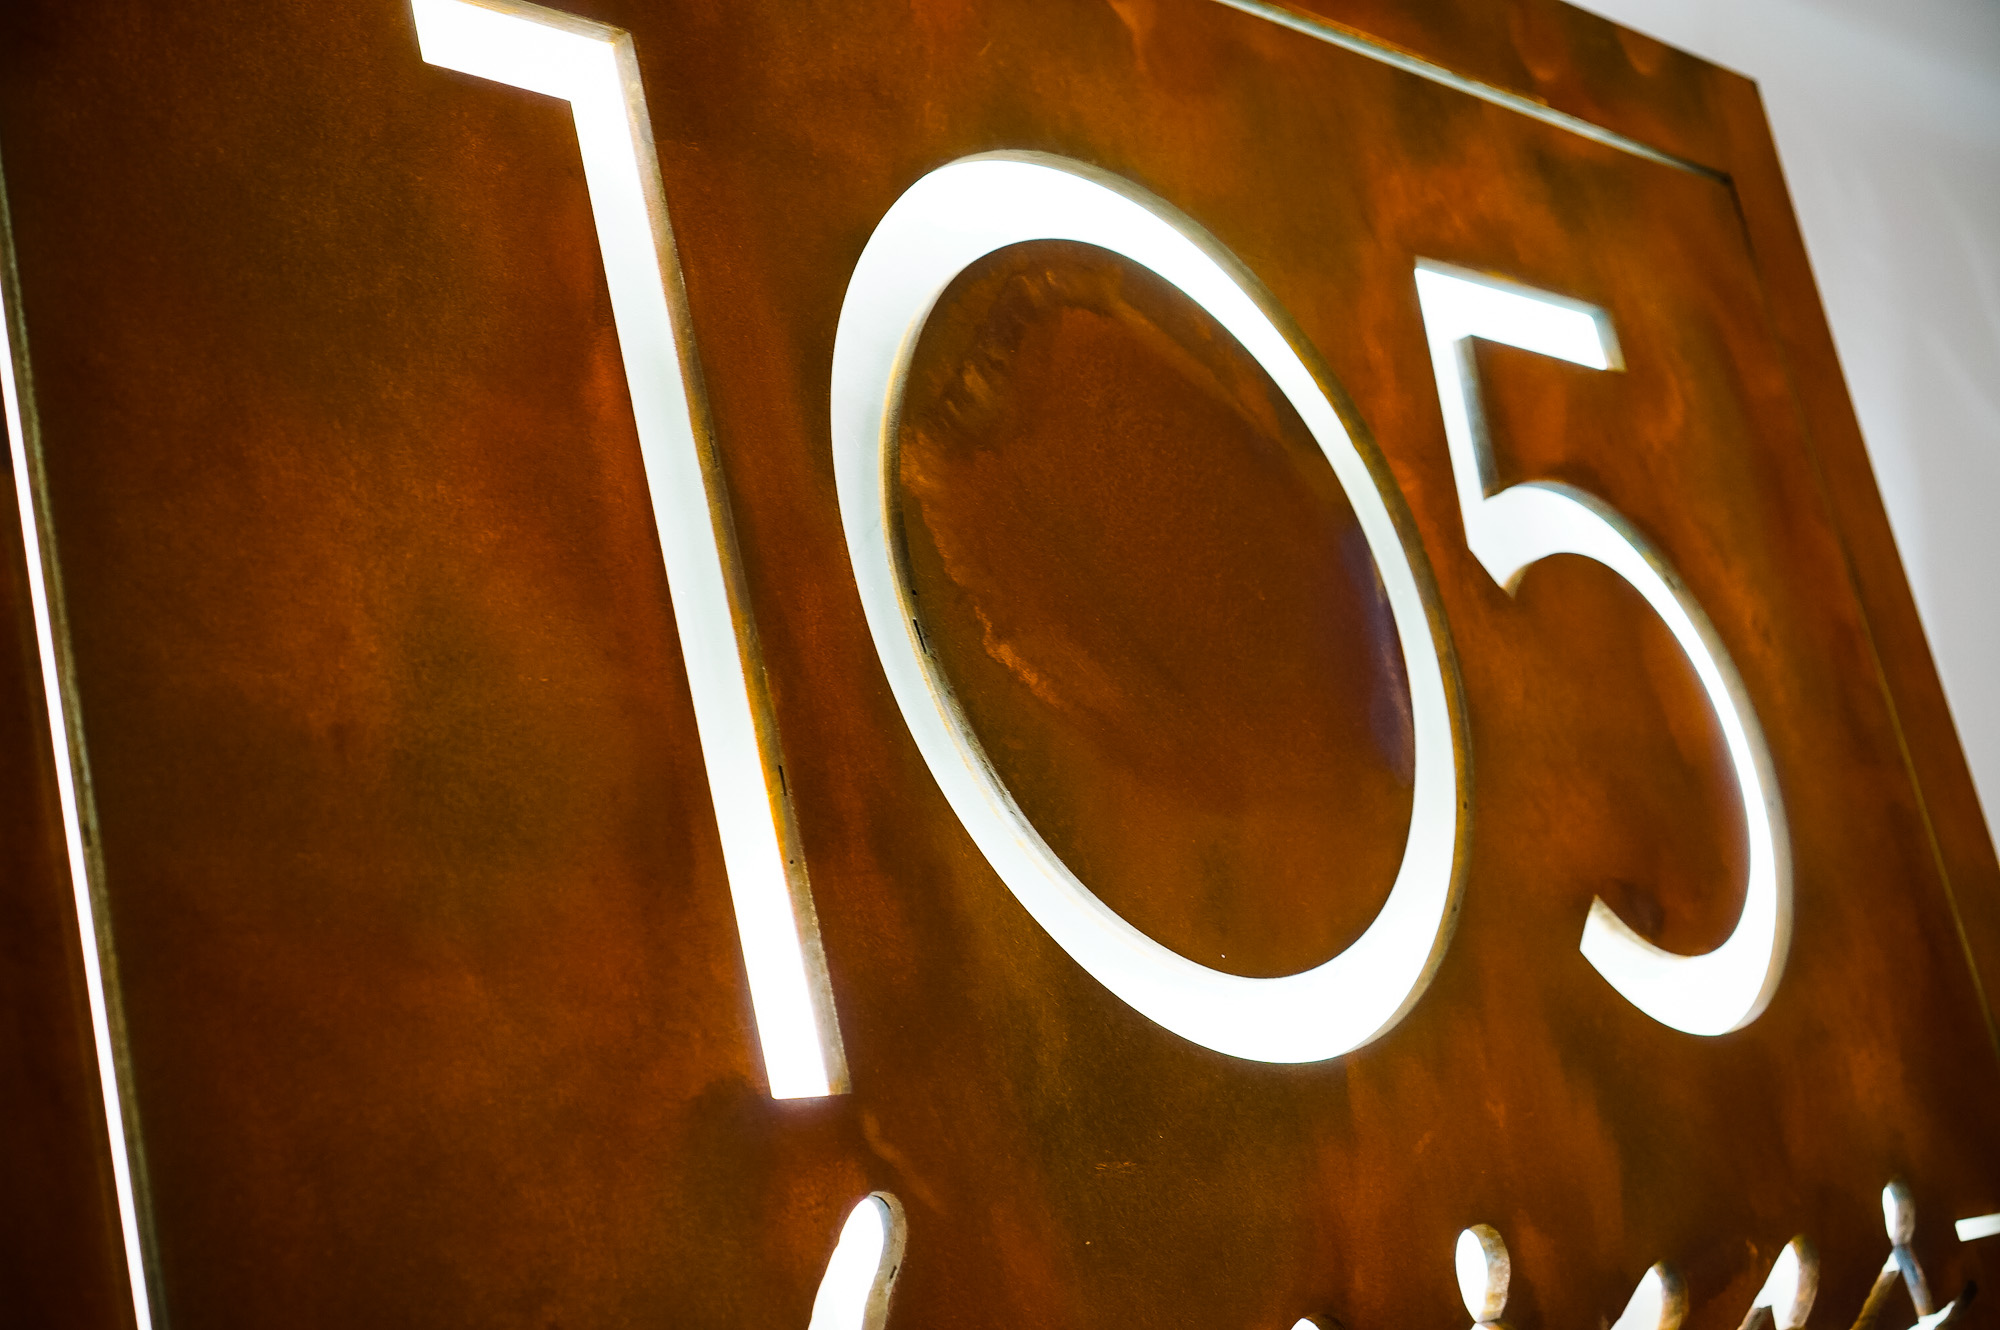 Rusted metal illuminated sign for 105 Degrees, a hot yoga studio at Newtown Athletic Club, a premiere family fitness and wellness center serving residents of Newtown, PA